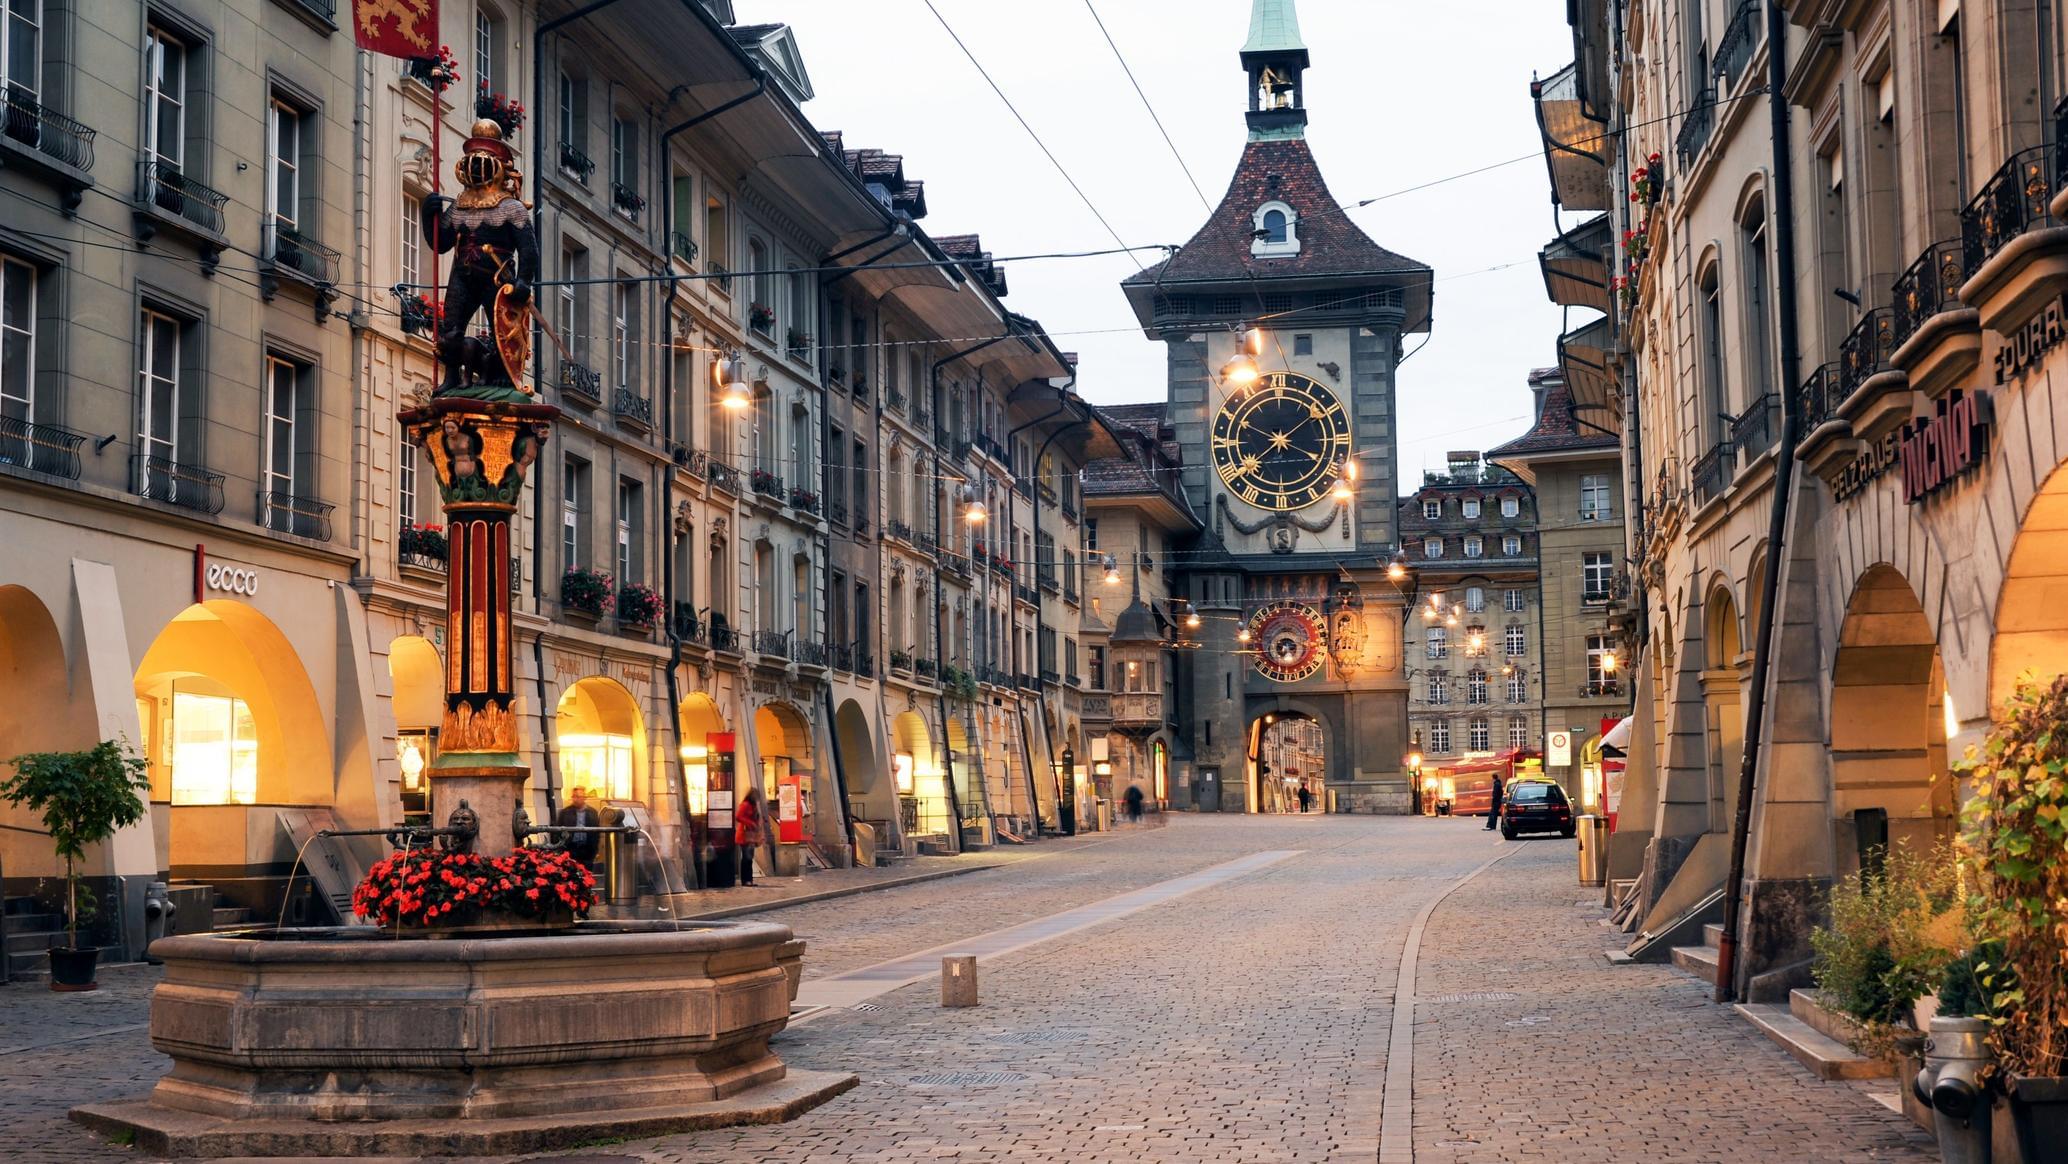 Visit Switzerland's capital city- Bern and see some prominent sites